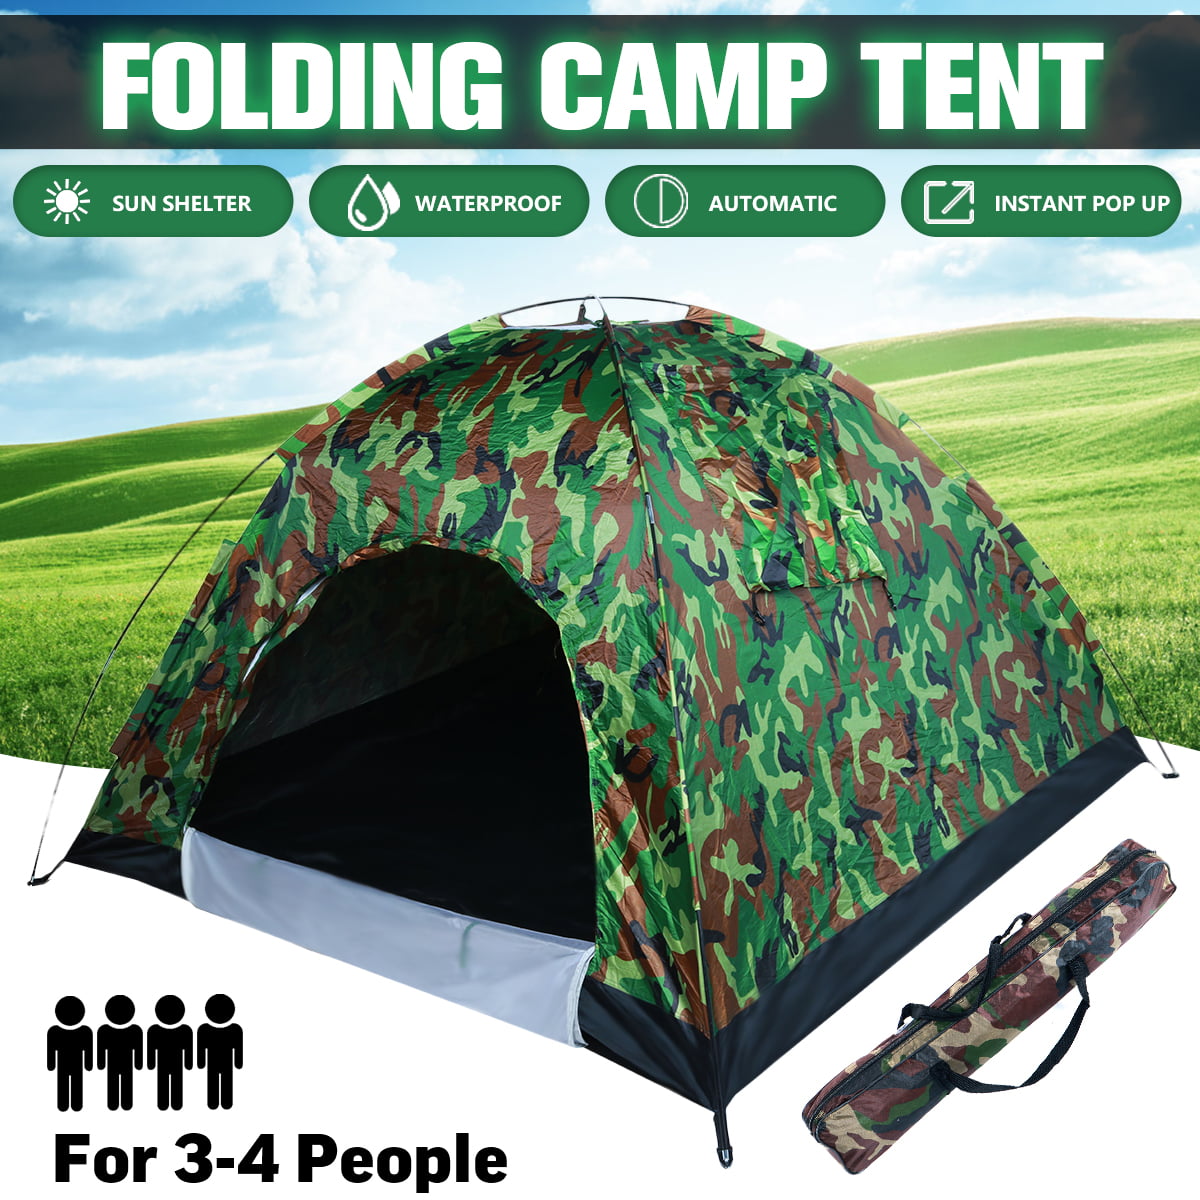 Sairis Single Layer 2 People Waterproof Camouflage Camping Hiking Tent Lightweight Outdoor Beach Travel Picnic Fishing Tent-camouflage 